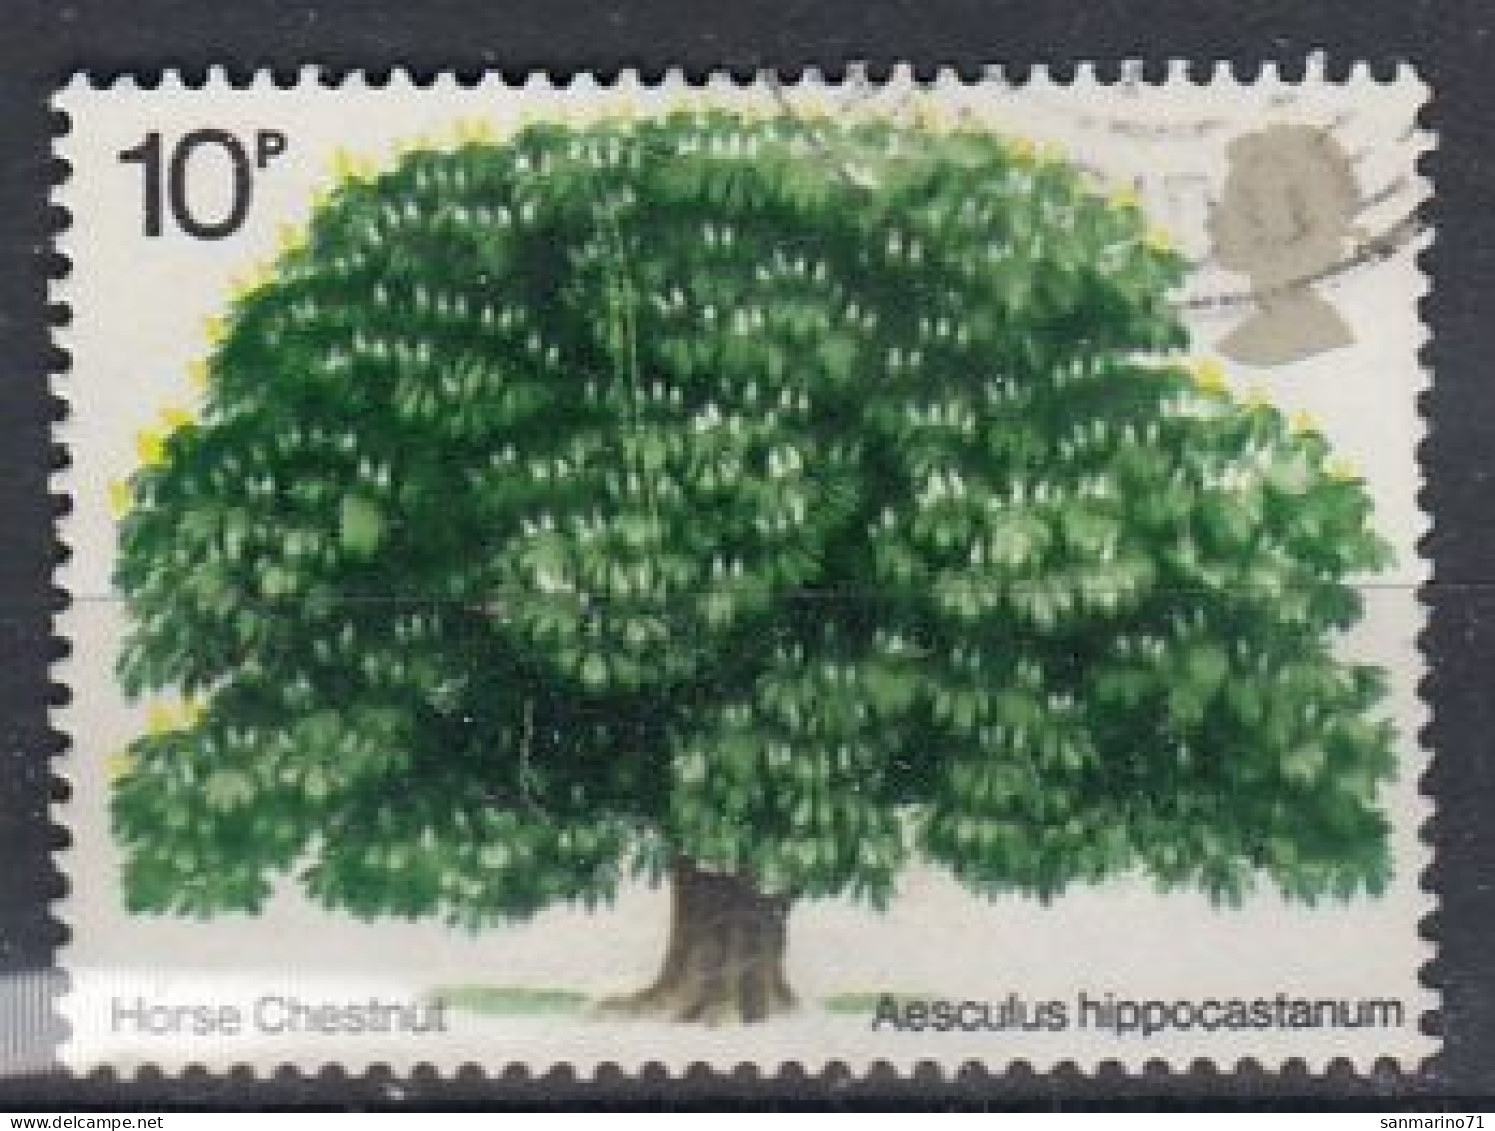 GREAT BRITAIN 645,used - Arbres